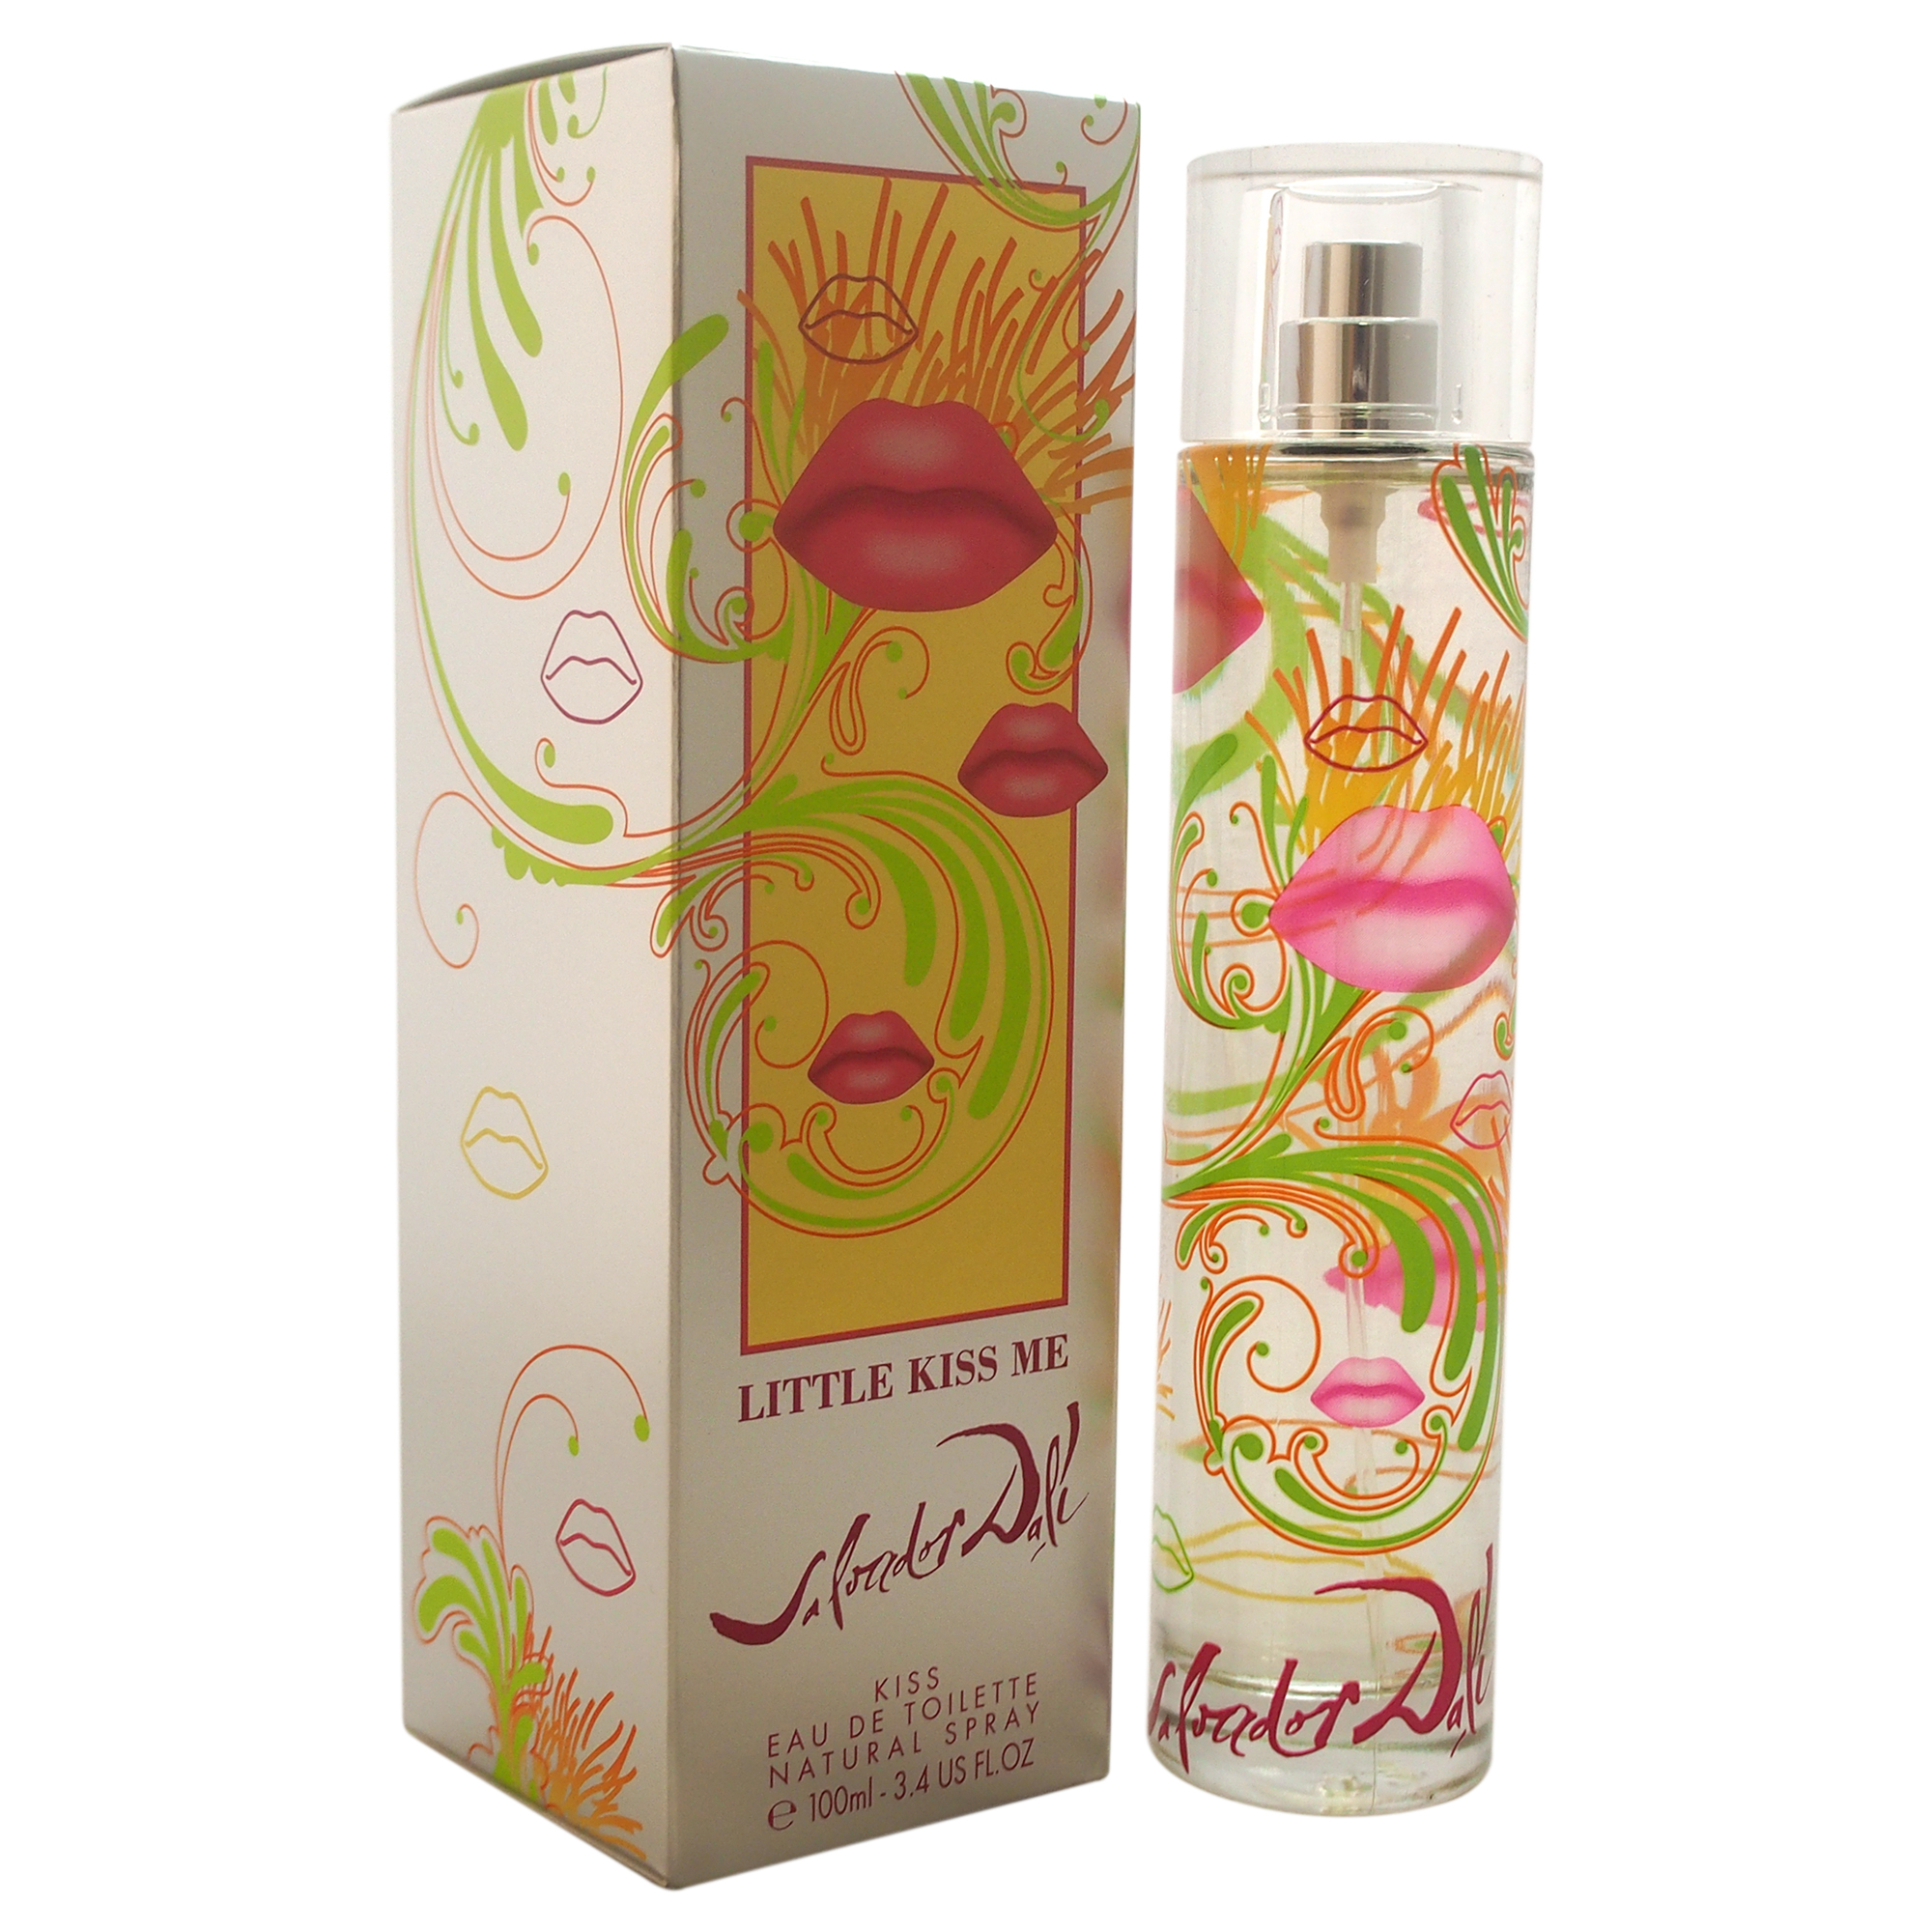 LITTLE KISS ME by Salvador Dali for Women - 3.4 oz EDT Spray